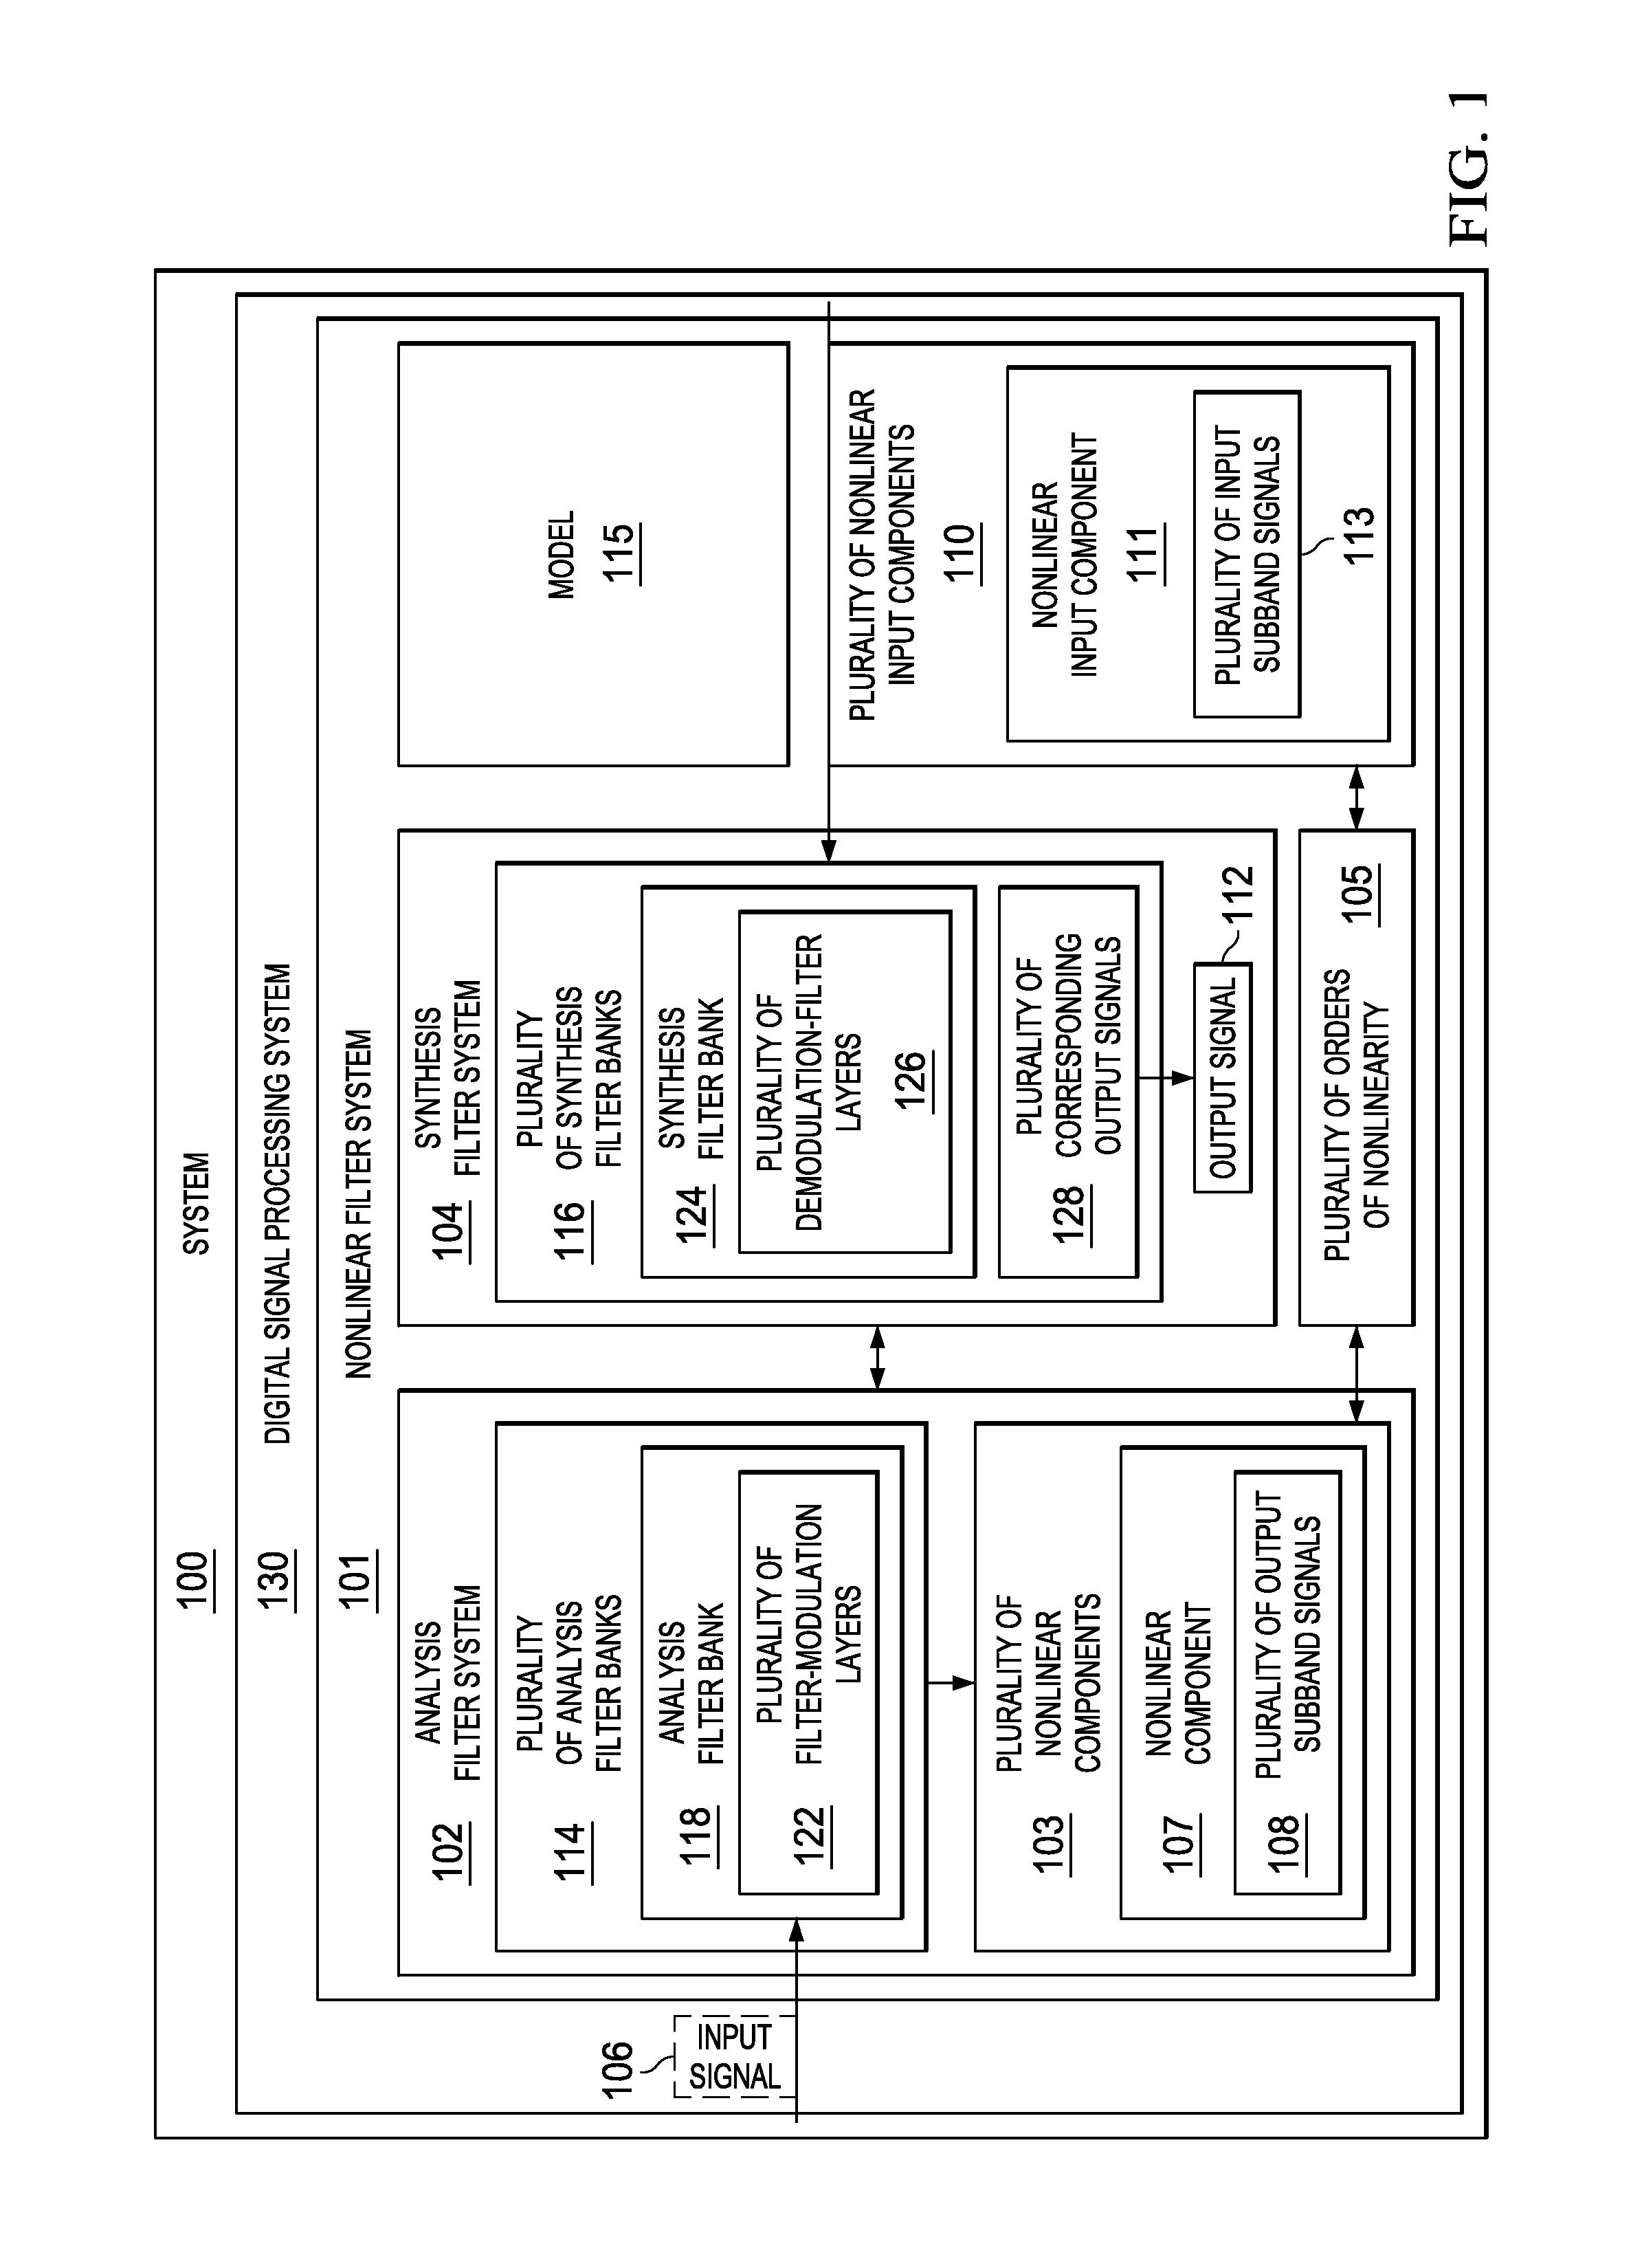 Nonlinear filtering using polyphase filter banks